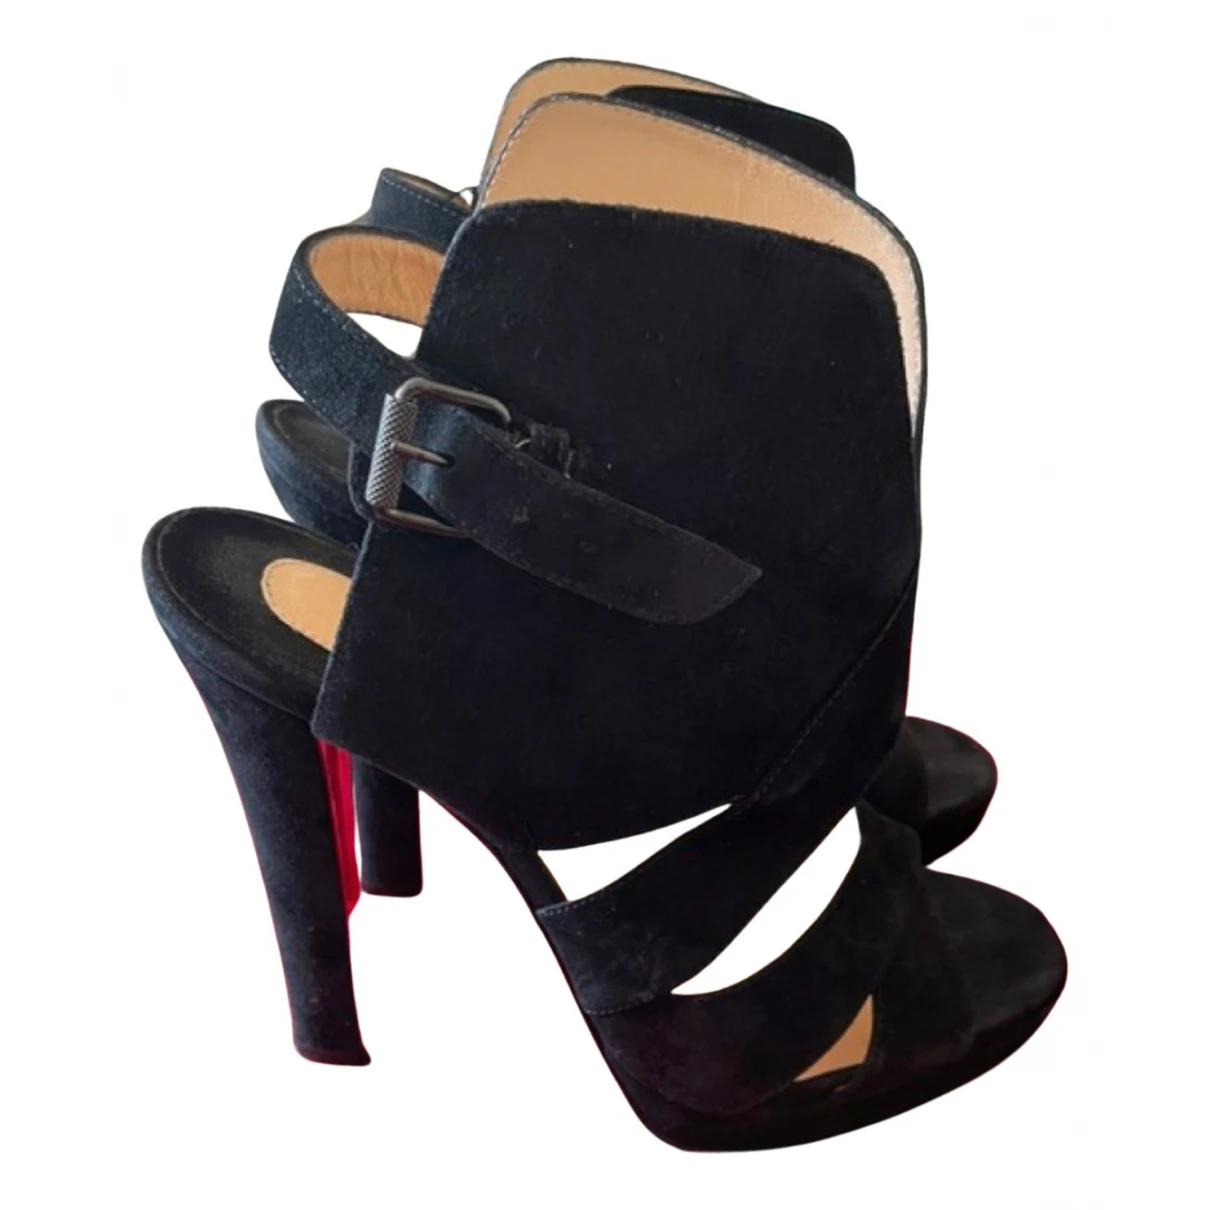 shoes Christian Louboutin sandals for Female Leather 37.5 EU. Used condition